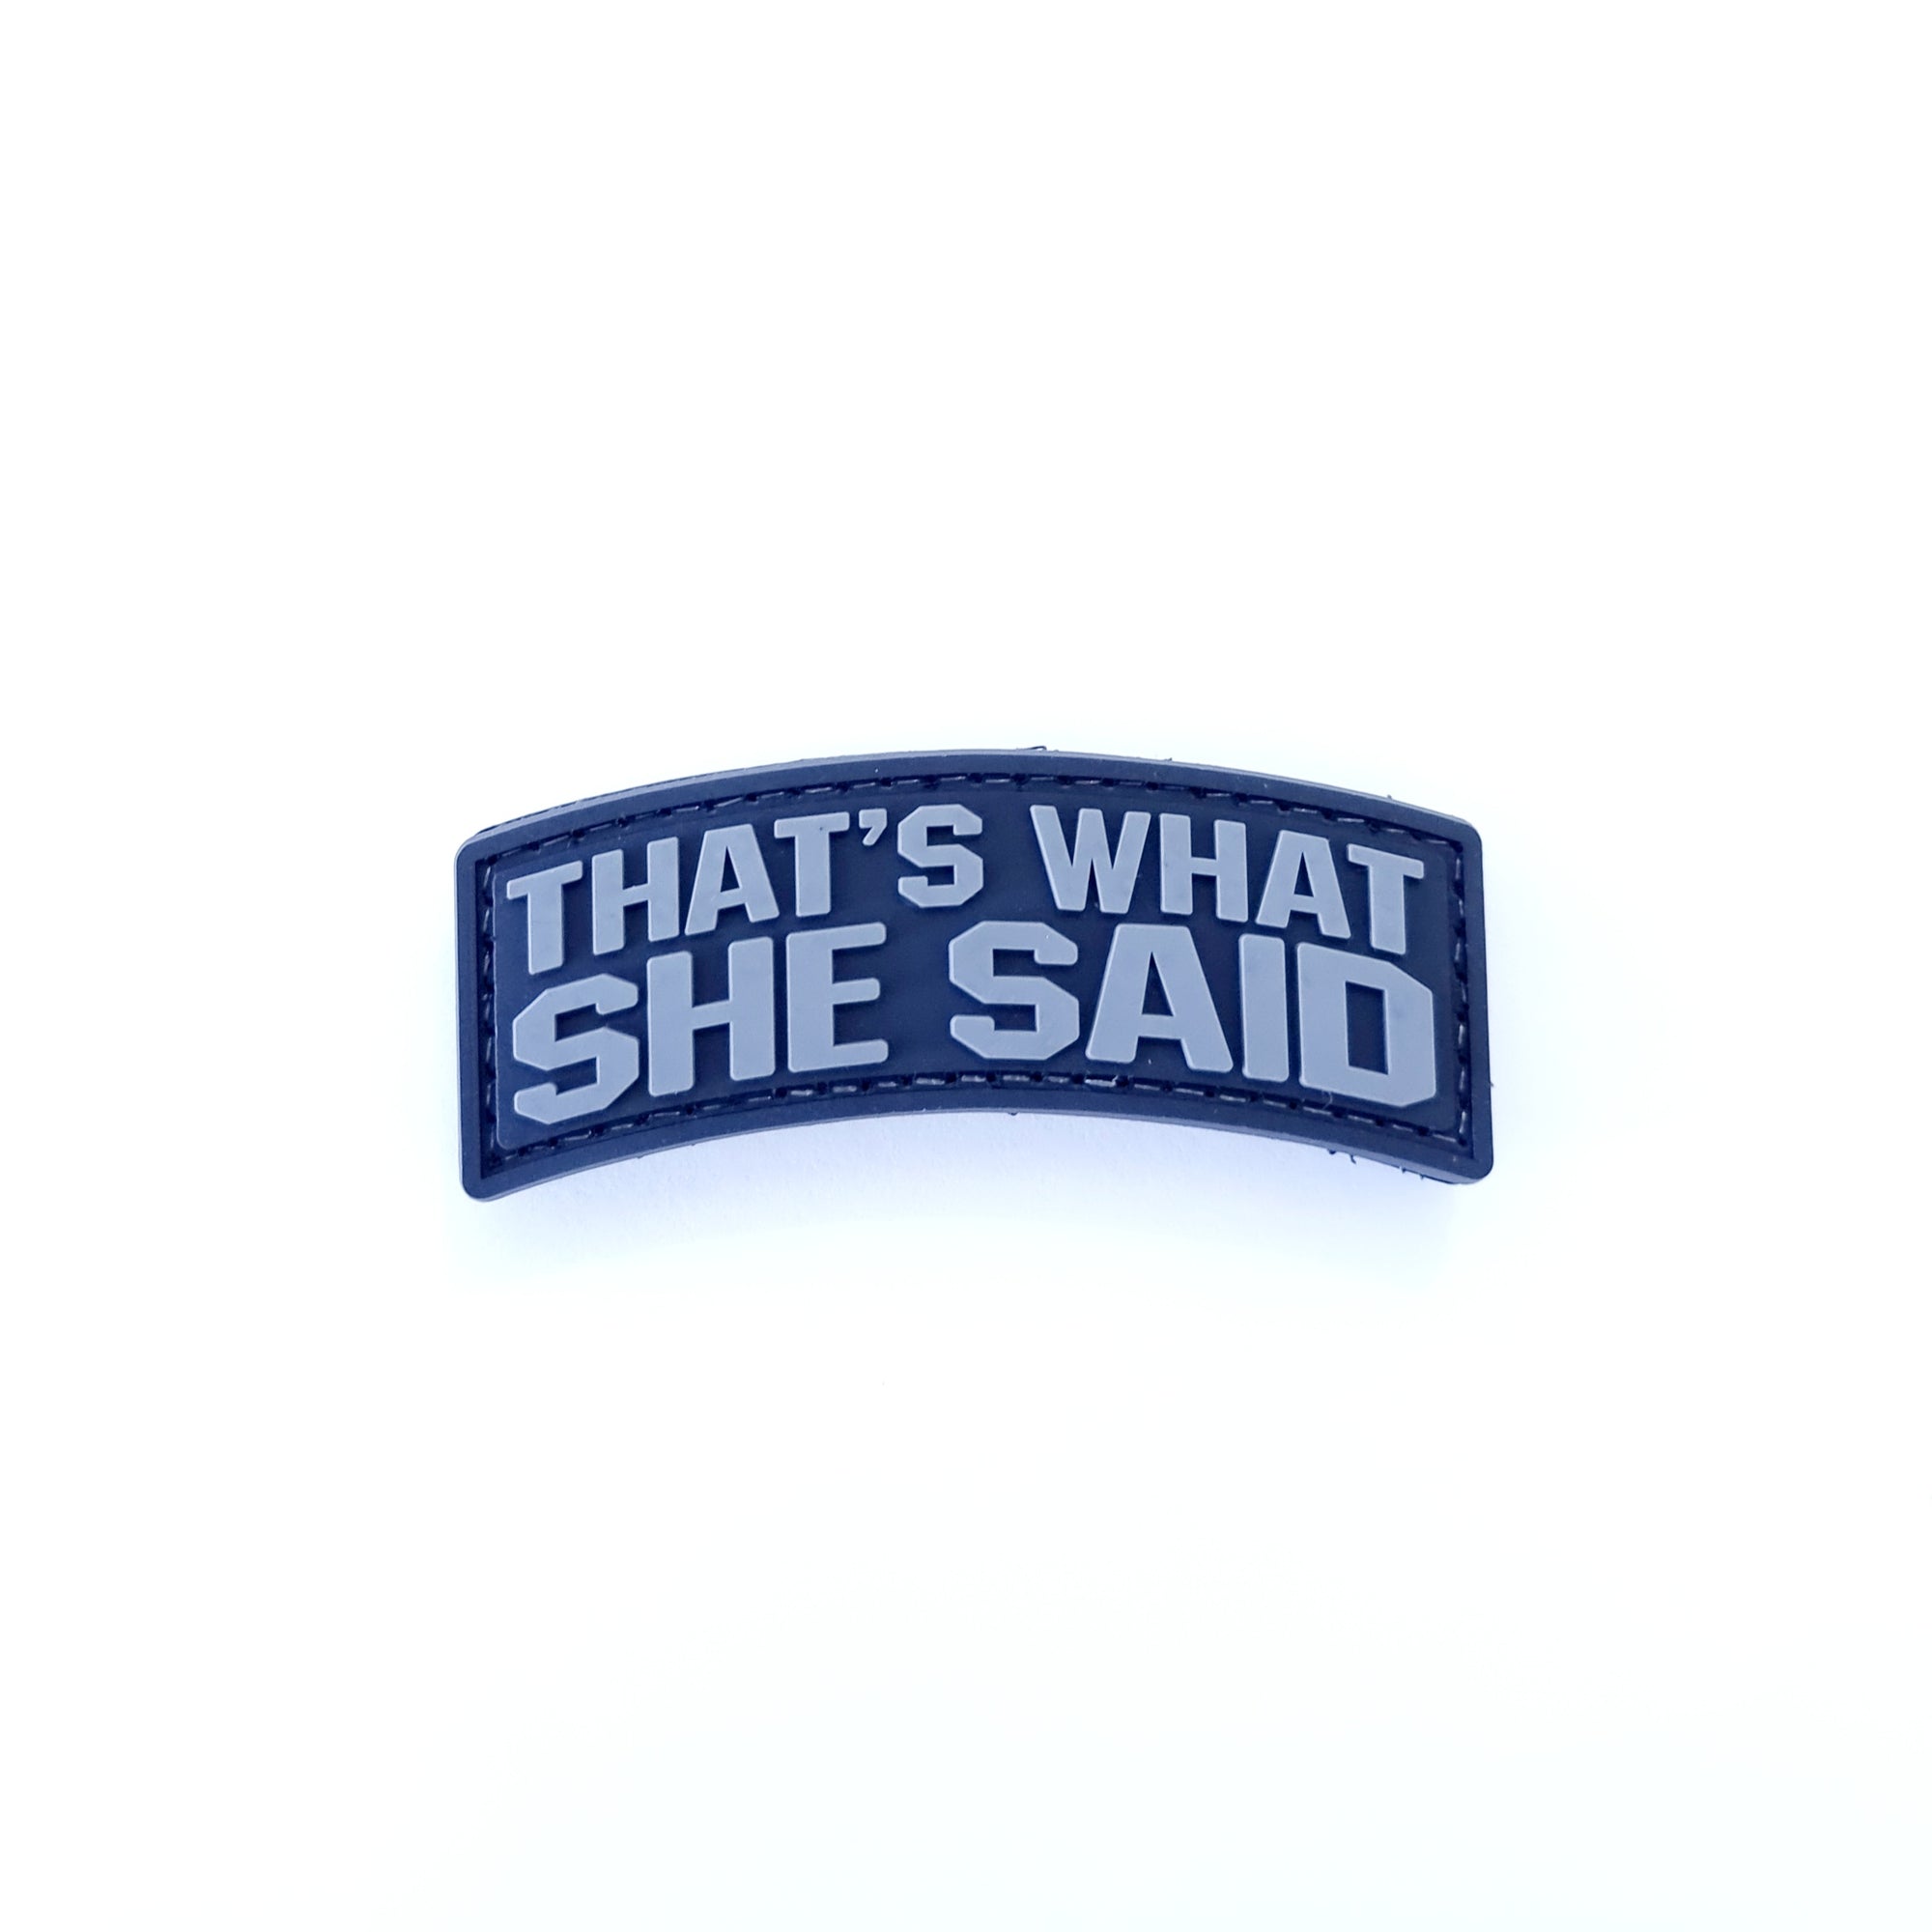 'That's what she said' (grey) PVC Patch